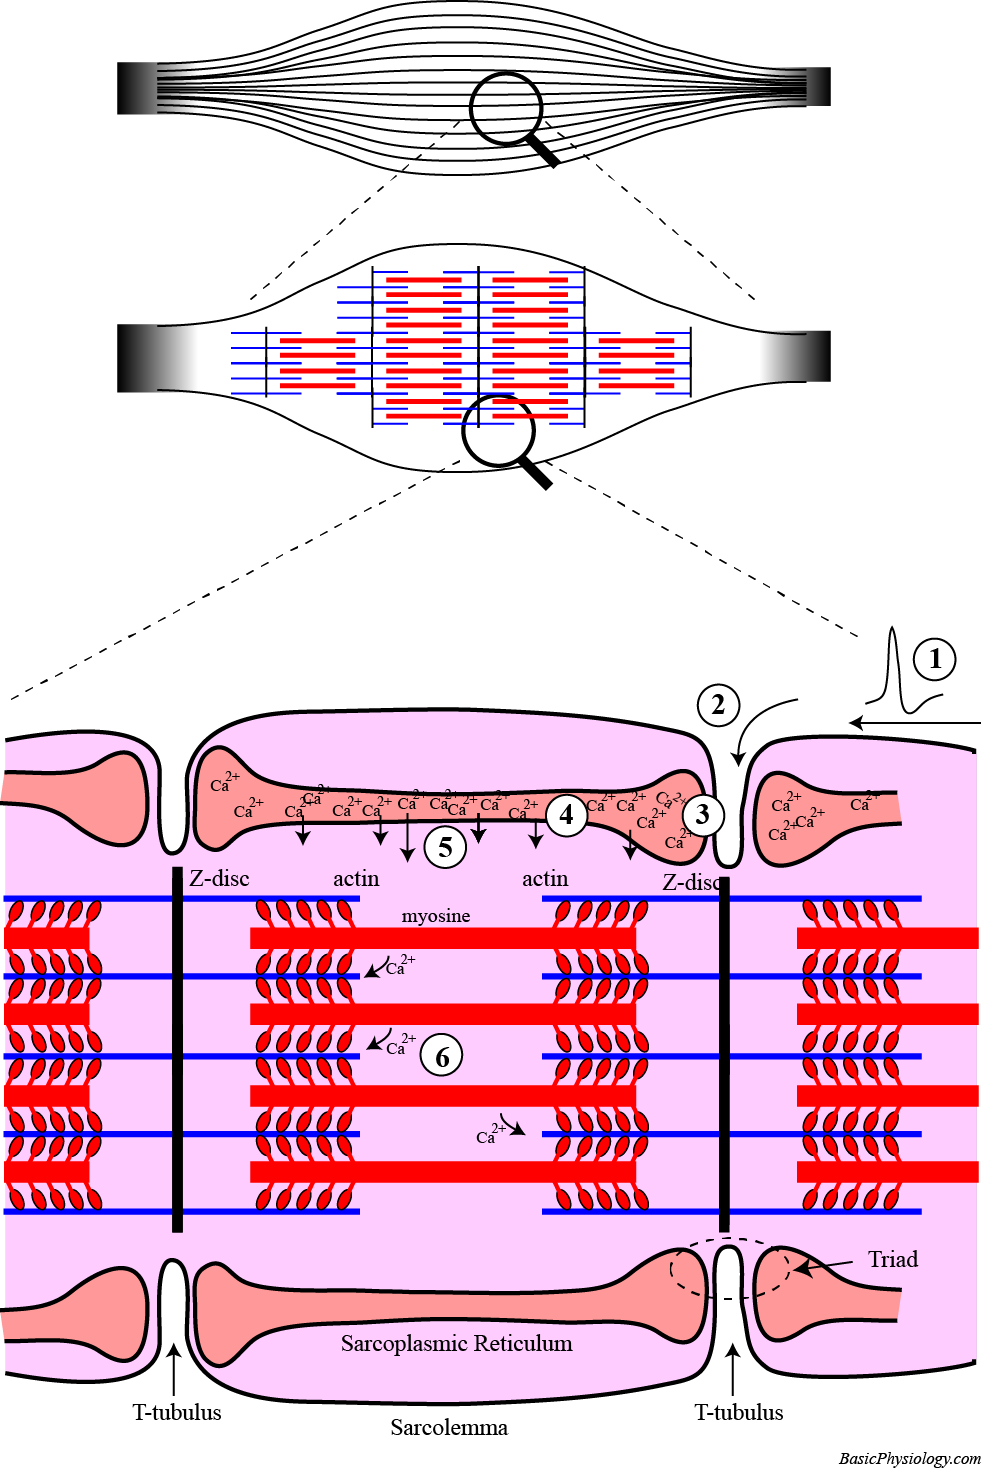 Architecture of a skeletal muscle cell